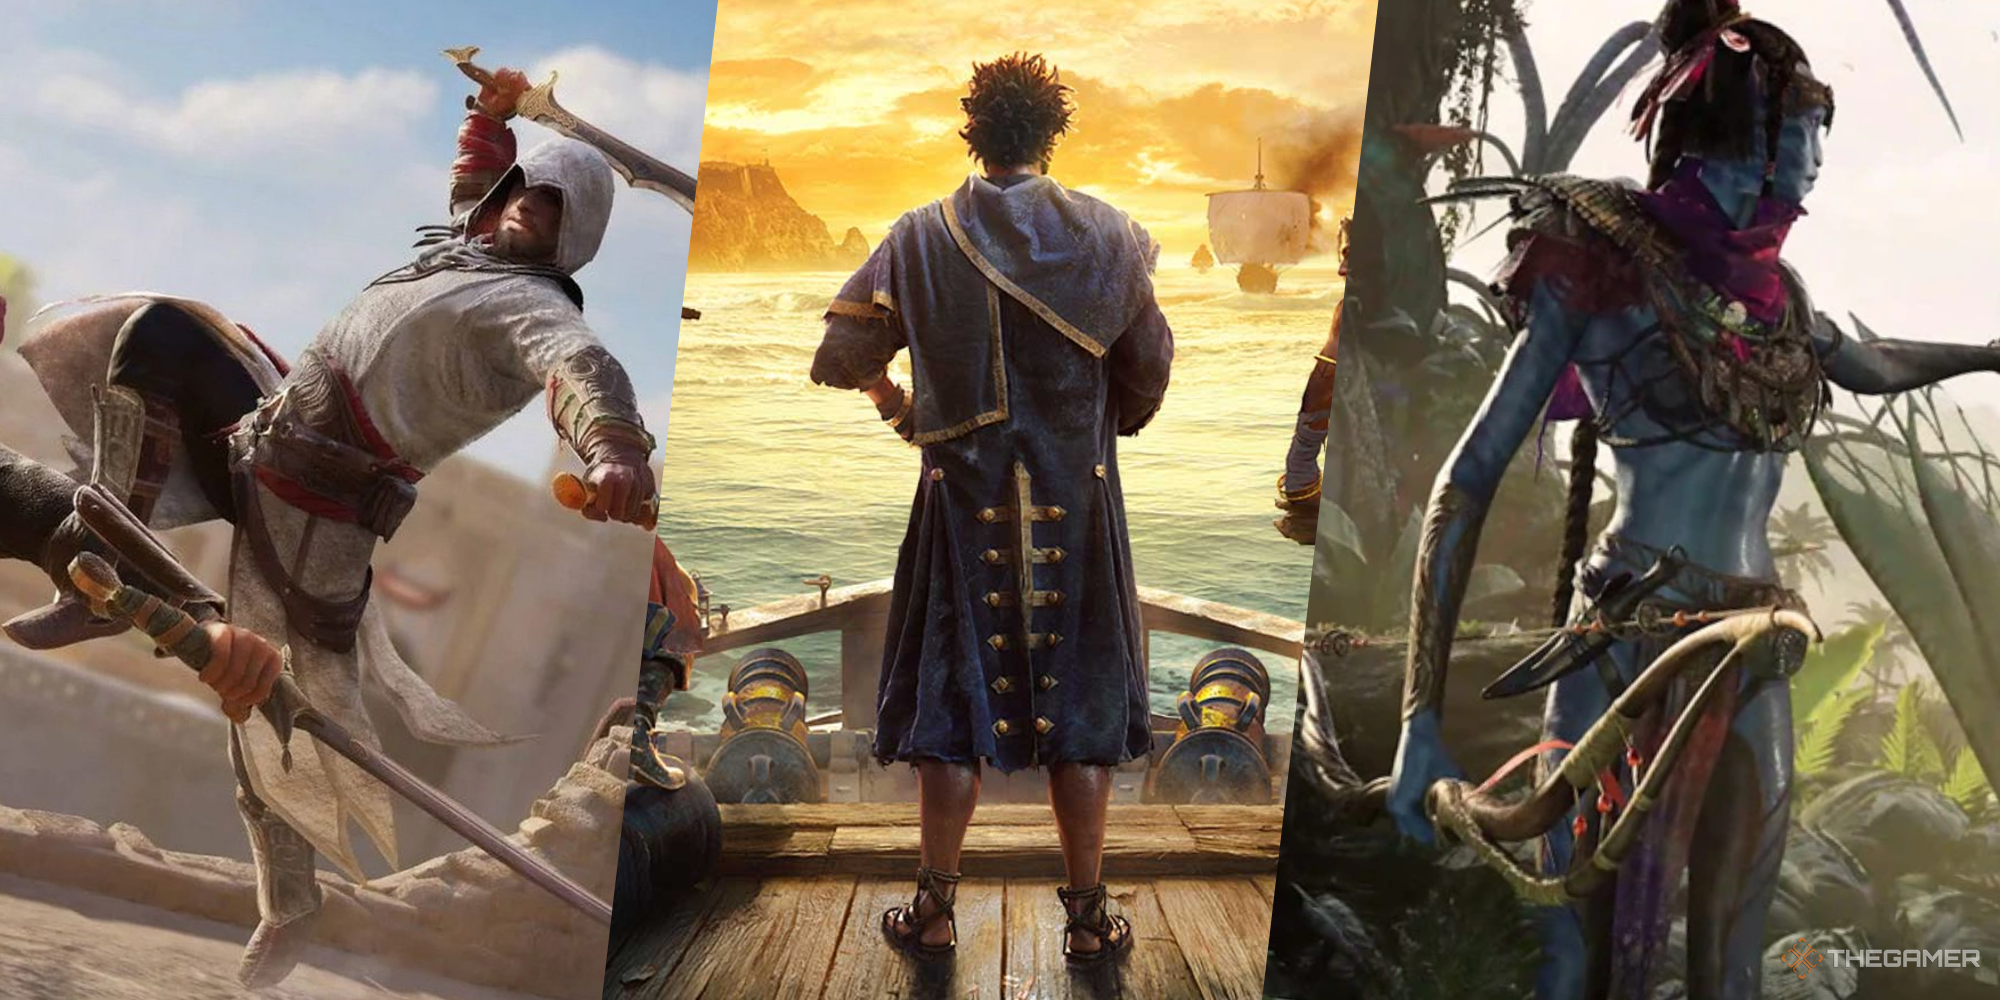 Left: Assassin's Creed character with a sword. Middle: Skull & Bones image, showing a pirate on his ship. Right: a blue Avatar character in a forest. 